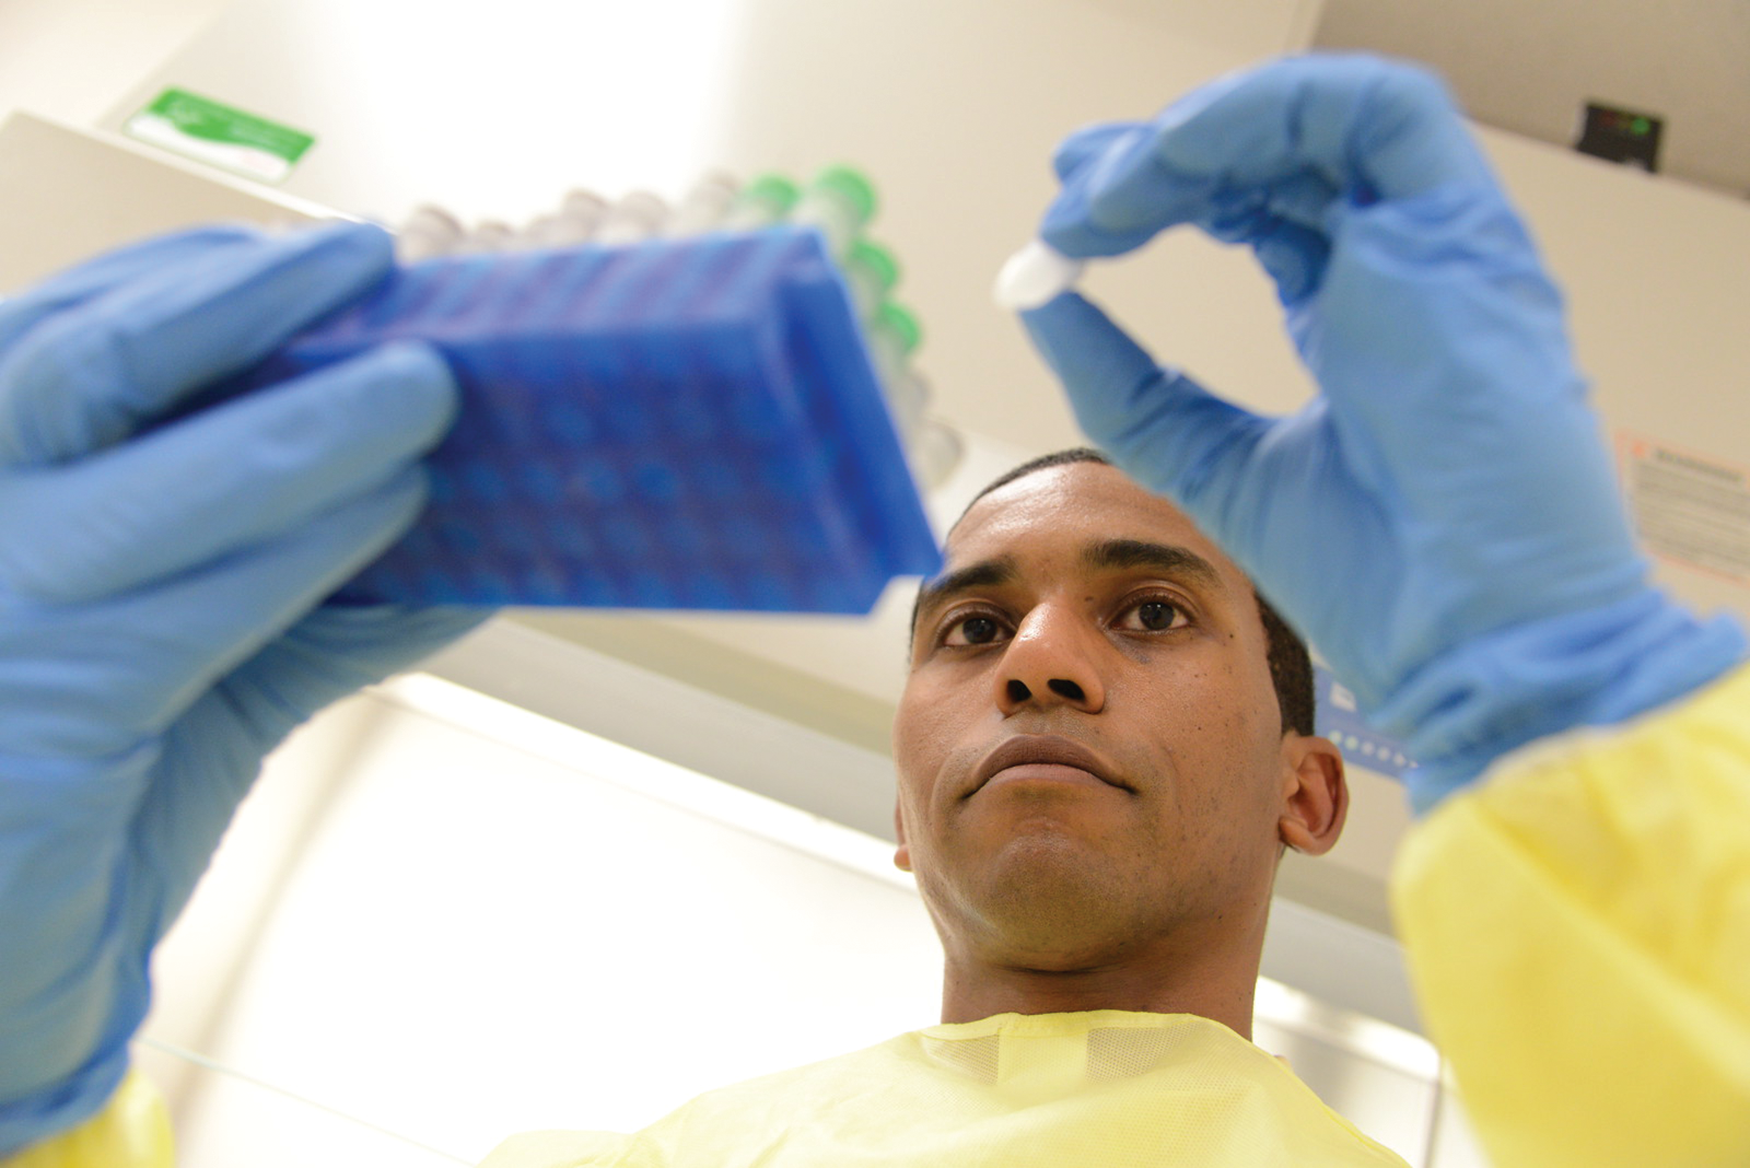 Figure 1. Isaac Kinde, M.D., Ph.D., head of research and innovation and a co-founder of the cancer-screening company Thrive, which is developing and commercializing a liquid-biopsy test based upon innovative technology at Johns Hopkins University (JHU). (Photo courtesy of Thrive.)